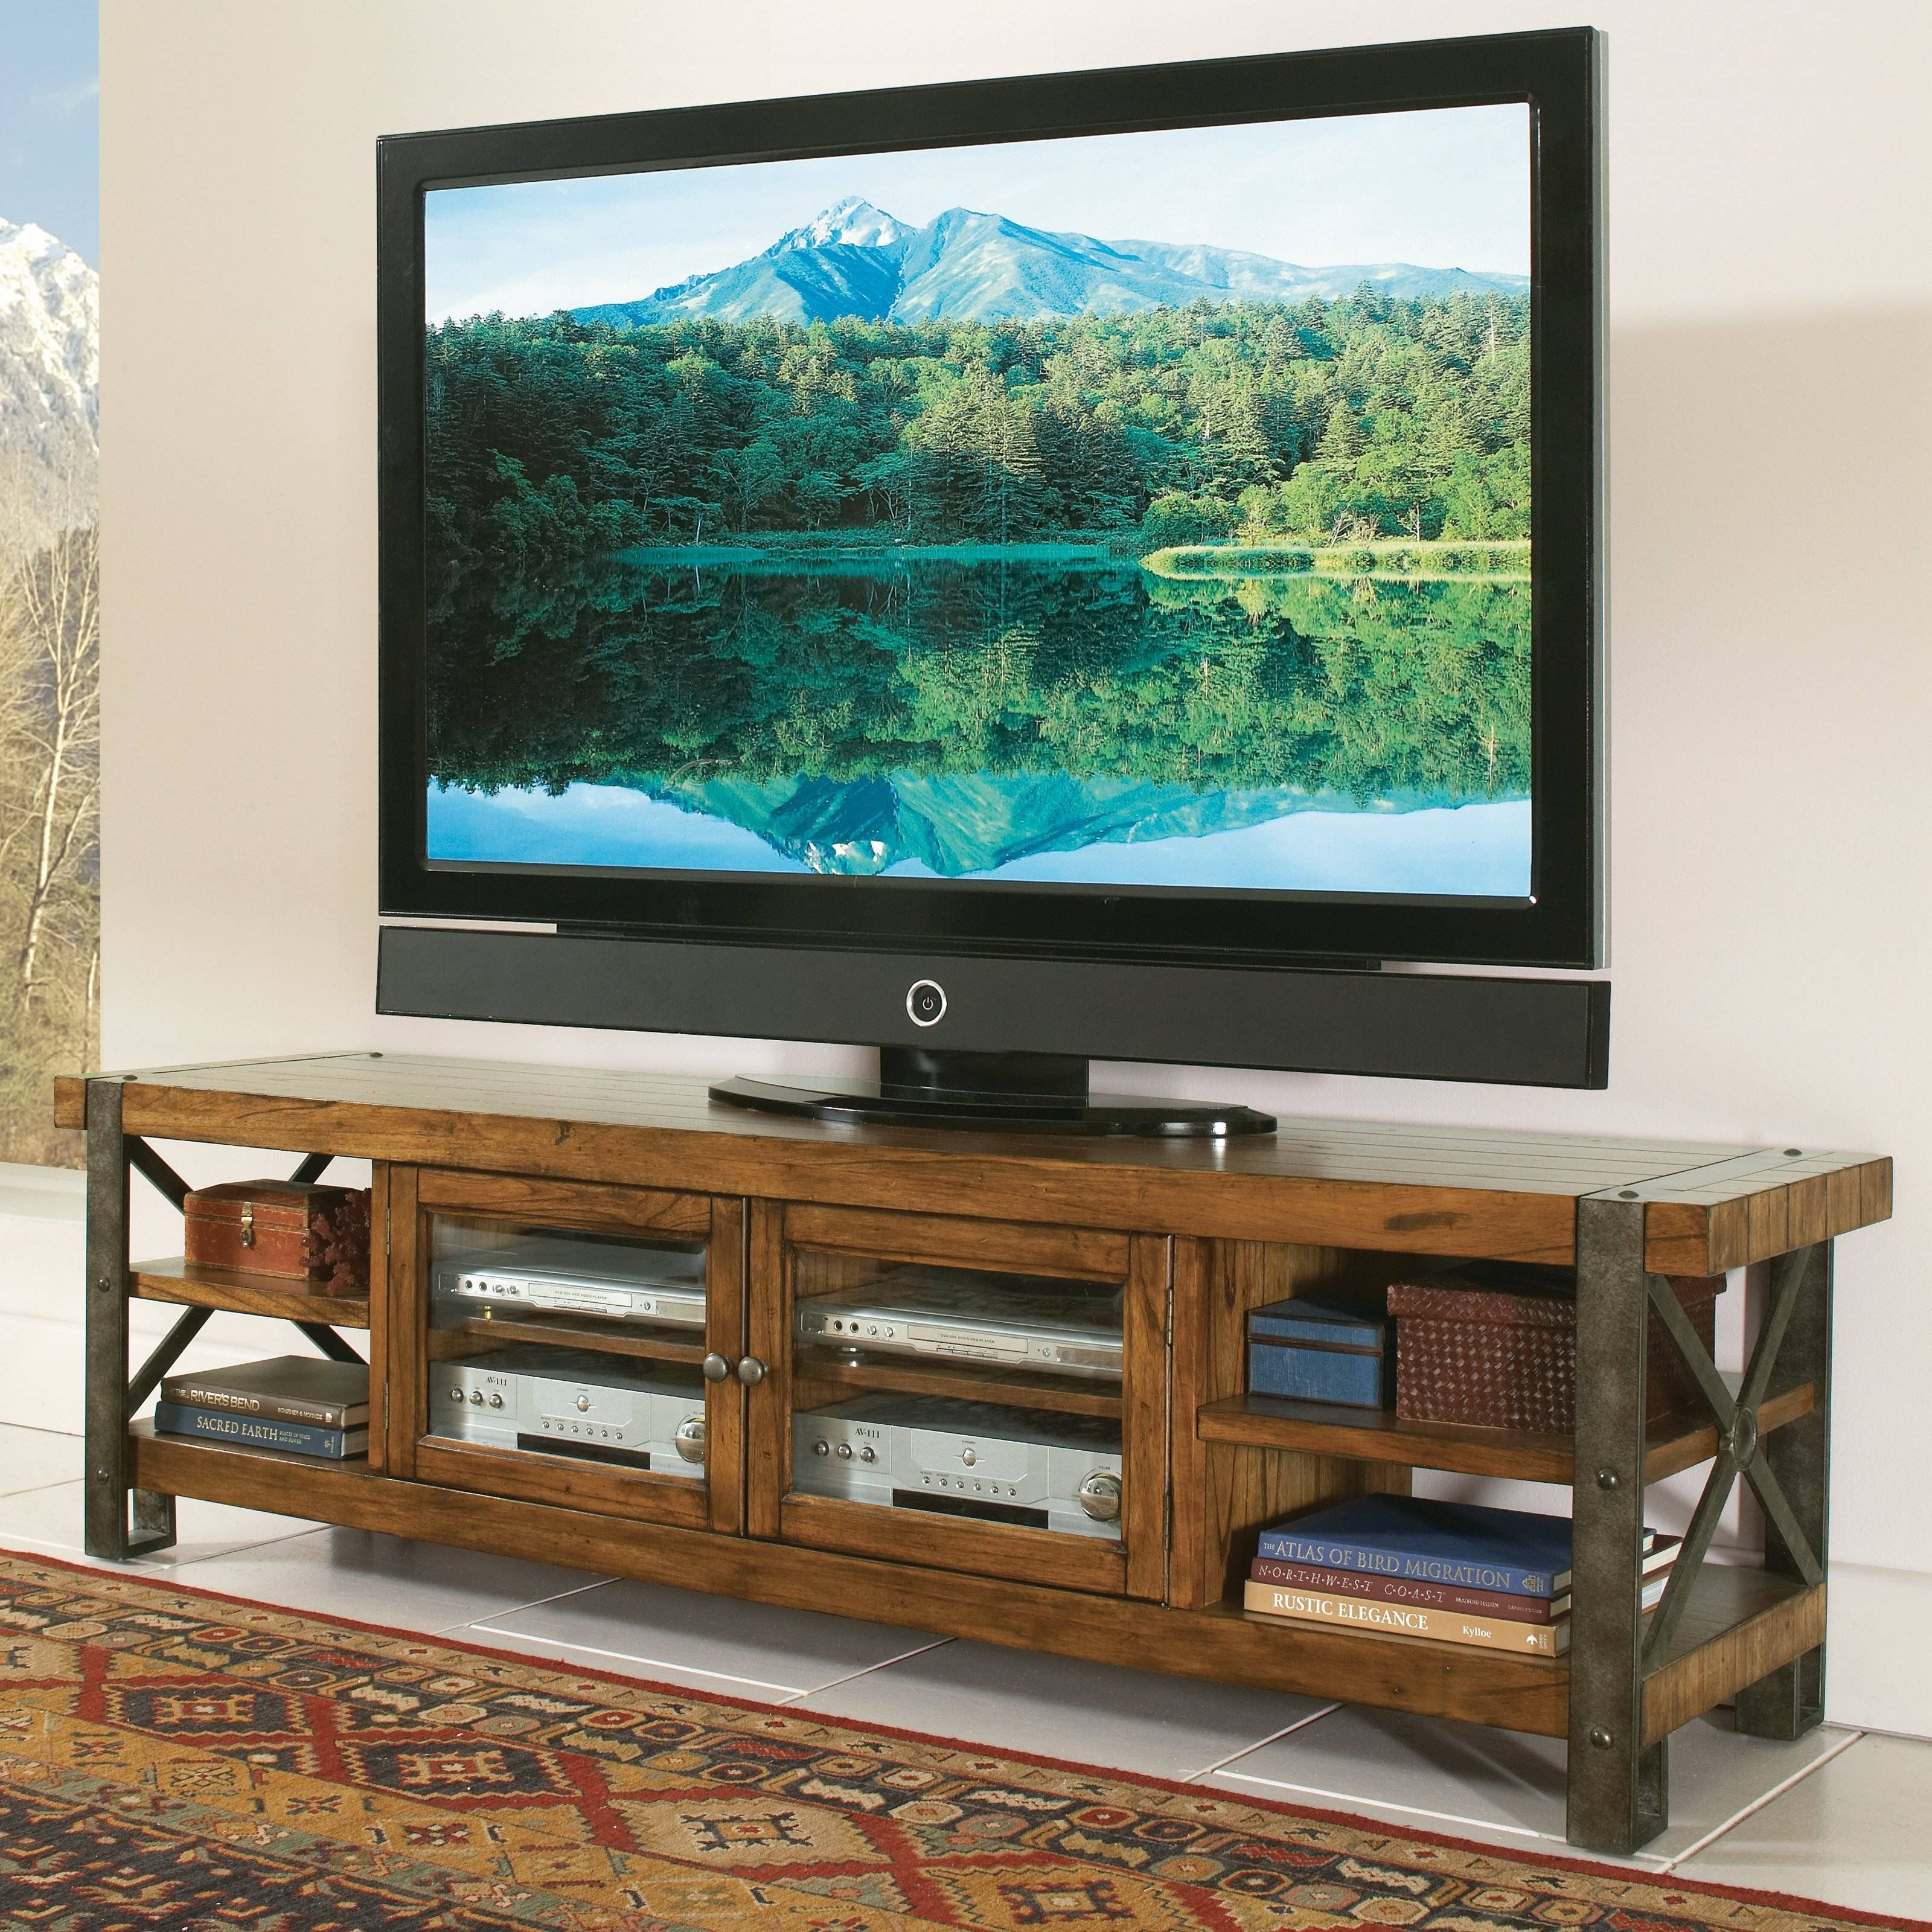 Distressed & Industrial Style Tv Stands | Hayneedle Throughout Rustic 60 Inch Tv Stands (View 5 of 15)